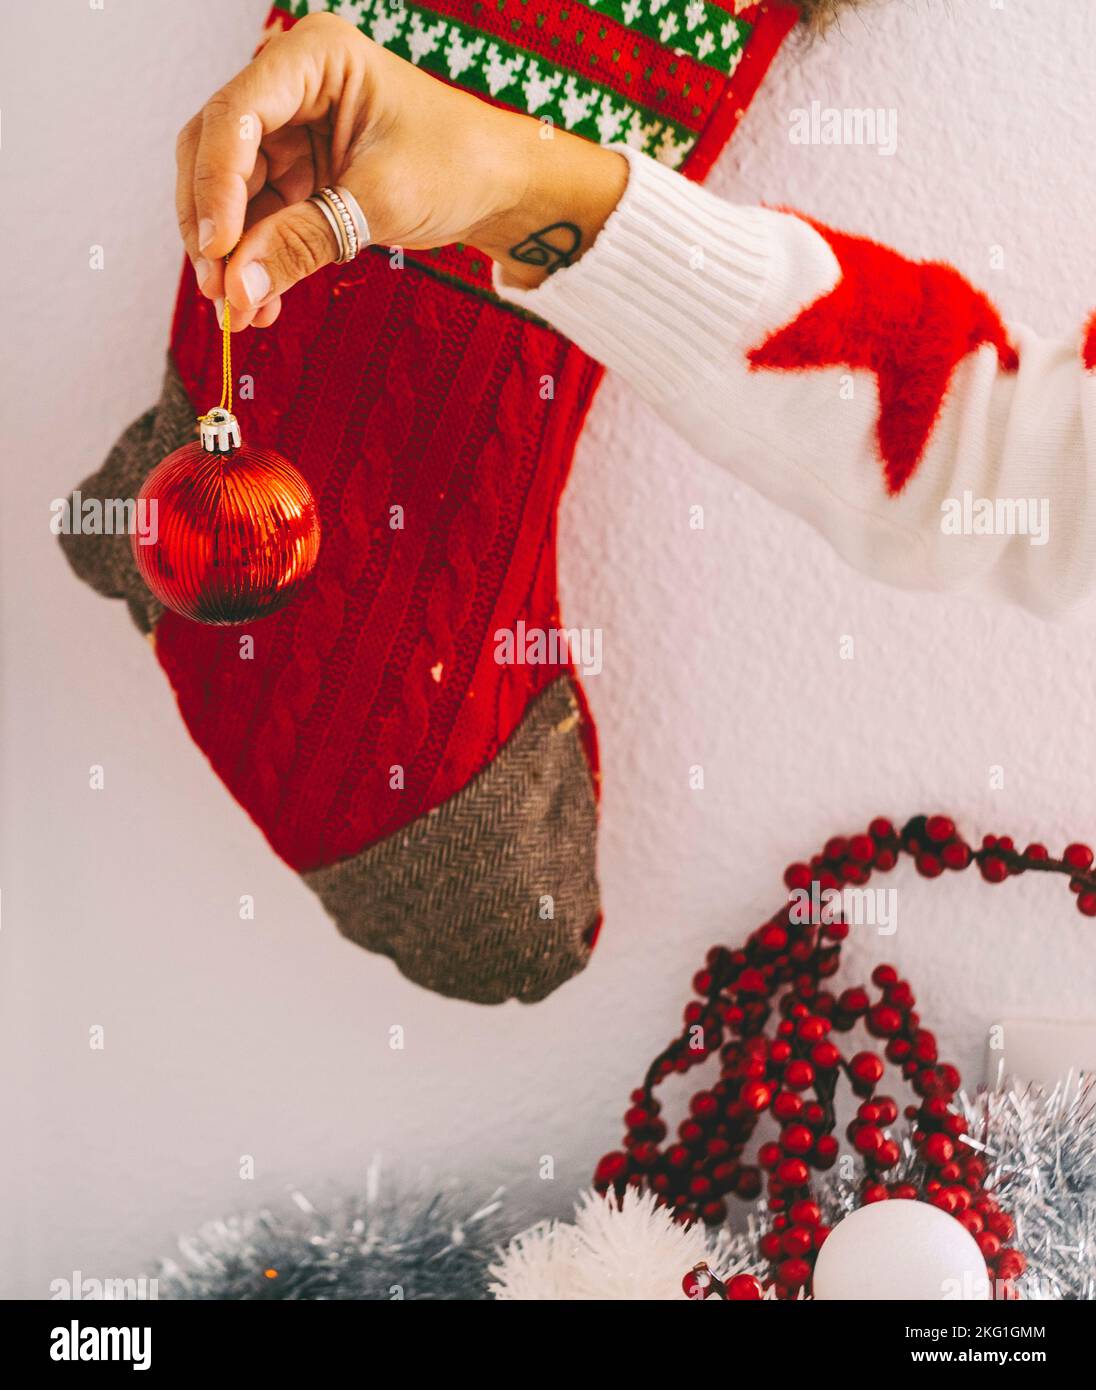 Christmas holiday season and home decoration concept image. Woman hands holding xmas ball with sock in background. Red december color concept. Home wa Stock Photo